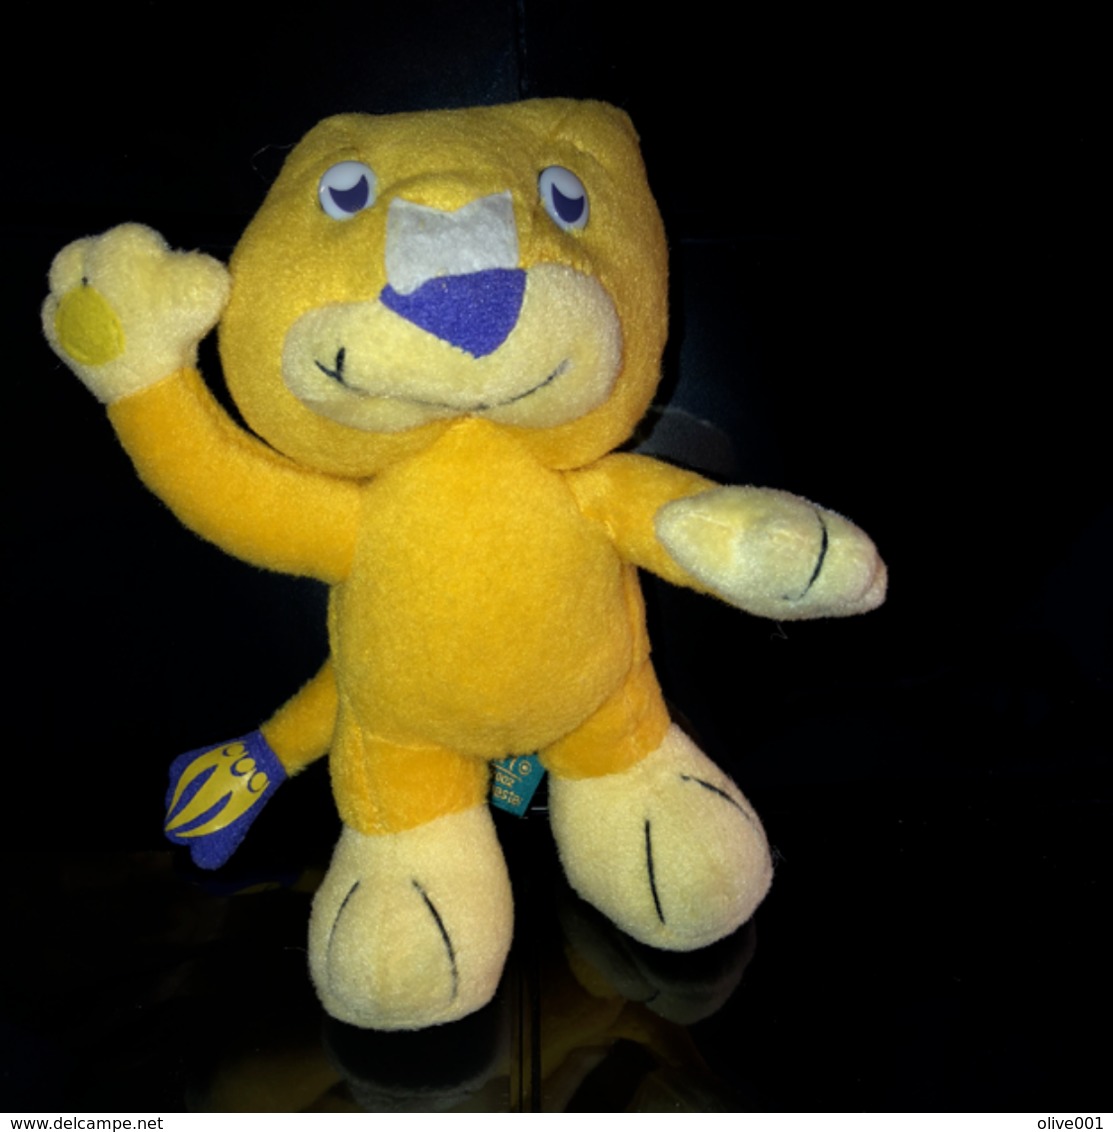 Manchester 2002 Commonwealth Games Mascot - Apparel, Souvenirs & Other